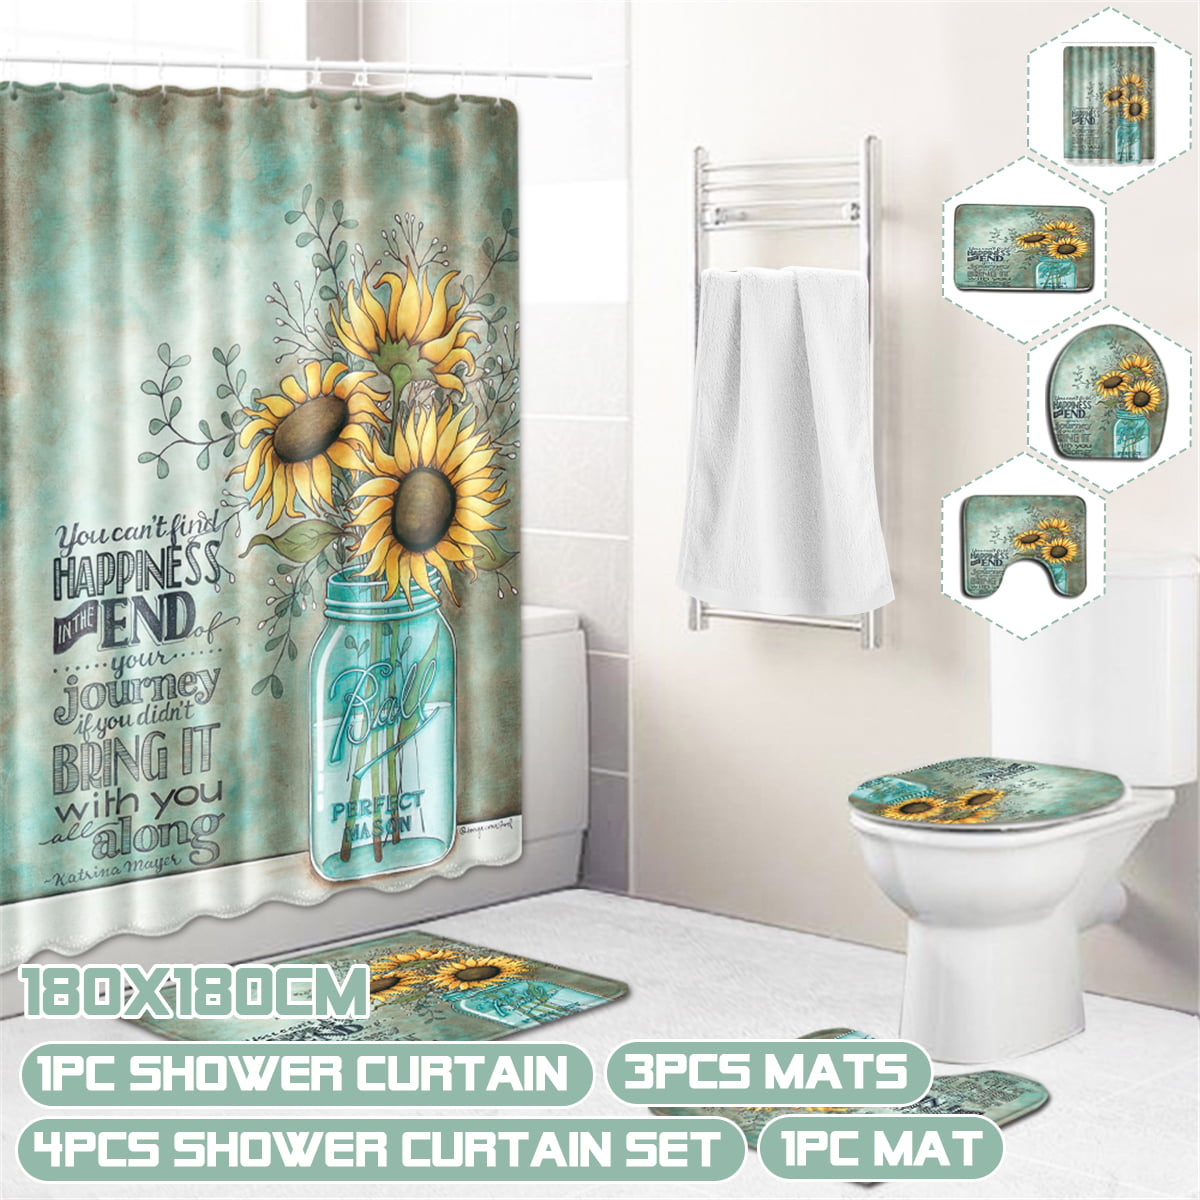 Sunflower and cat Shower Curtain Toilet Cover Rug Mat Contour Rug Set 